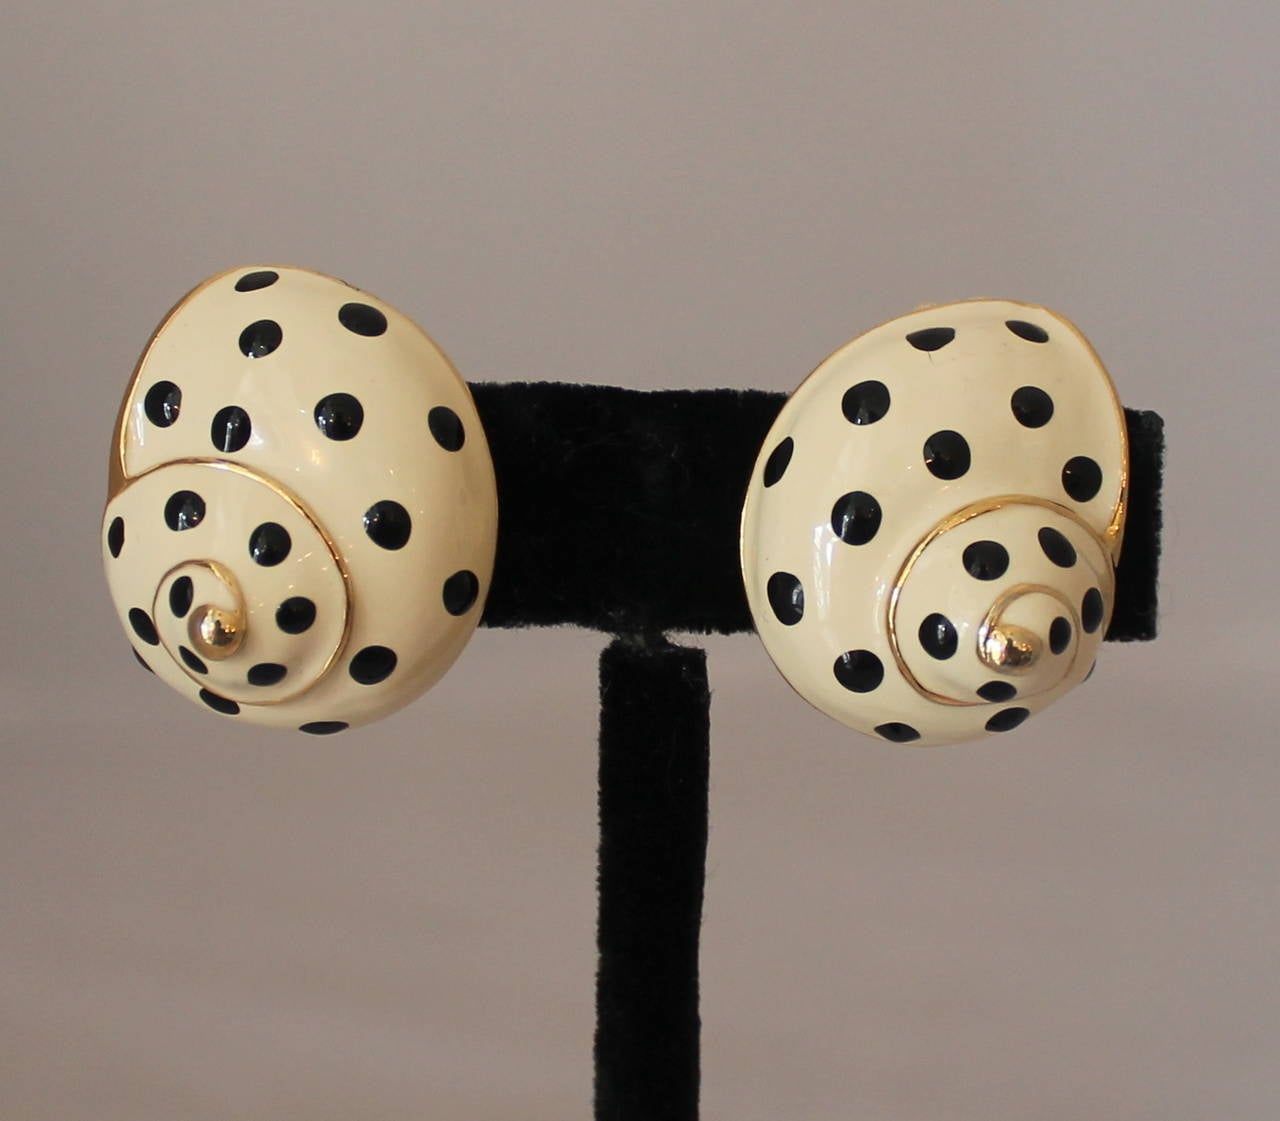 Kenneth Jay Lane 1990's Black & Ivory Polka-Dot Enamel Seashell Clip-ons. These earrings are in excellent vintage condition and are gold-tone. These earrings have a matching pin in stock.

Length- 1.5